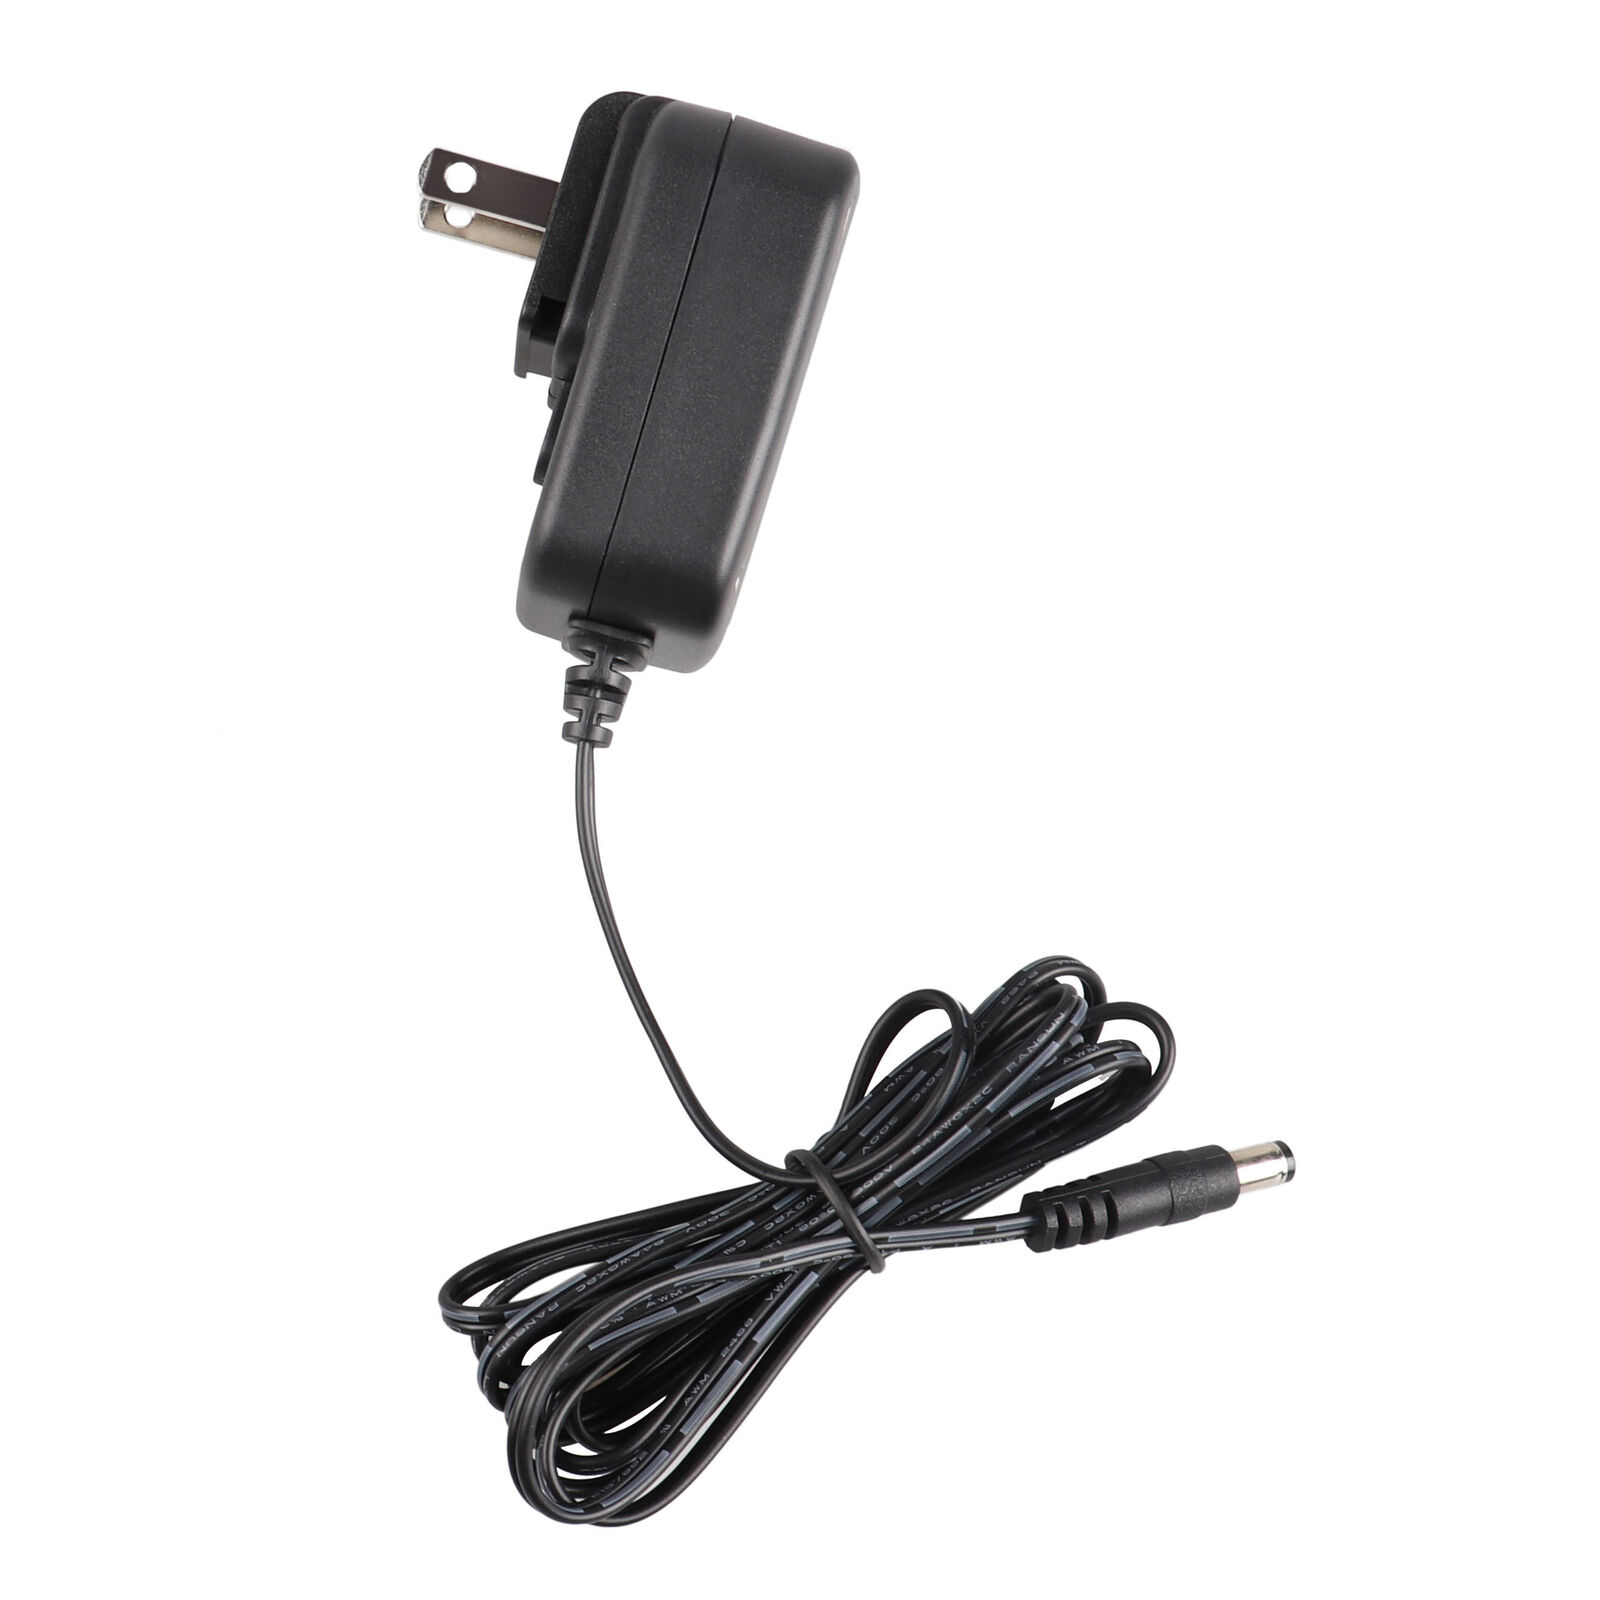 6V AC Adapter For LifeCORE Fitness Recumbent Bike 850RBs 950RBs 1050RBs Charger Compatible Brand For LifeCORE Type AC/D